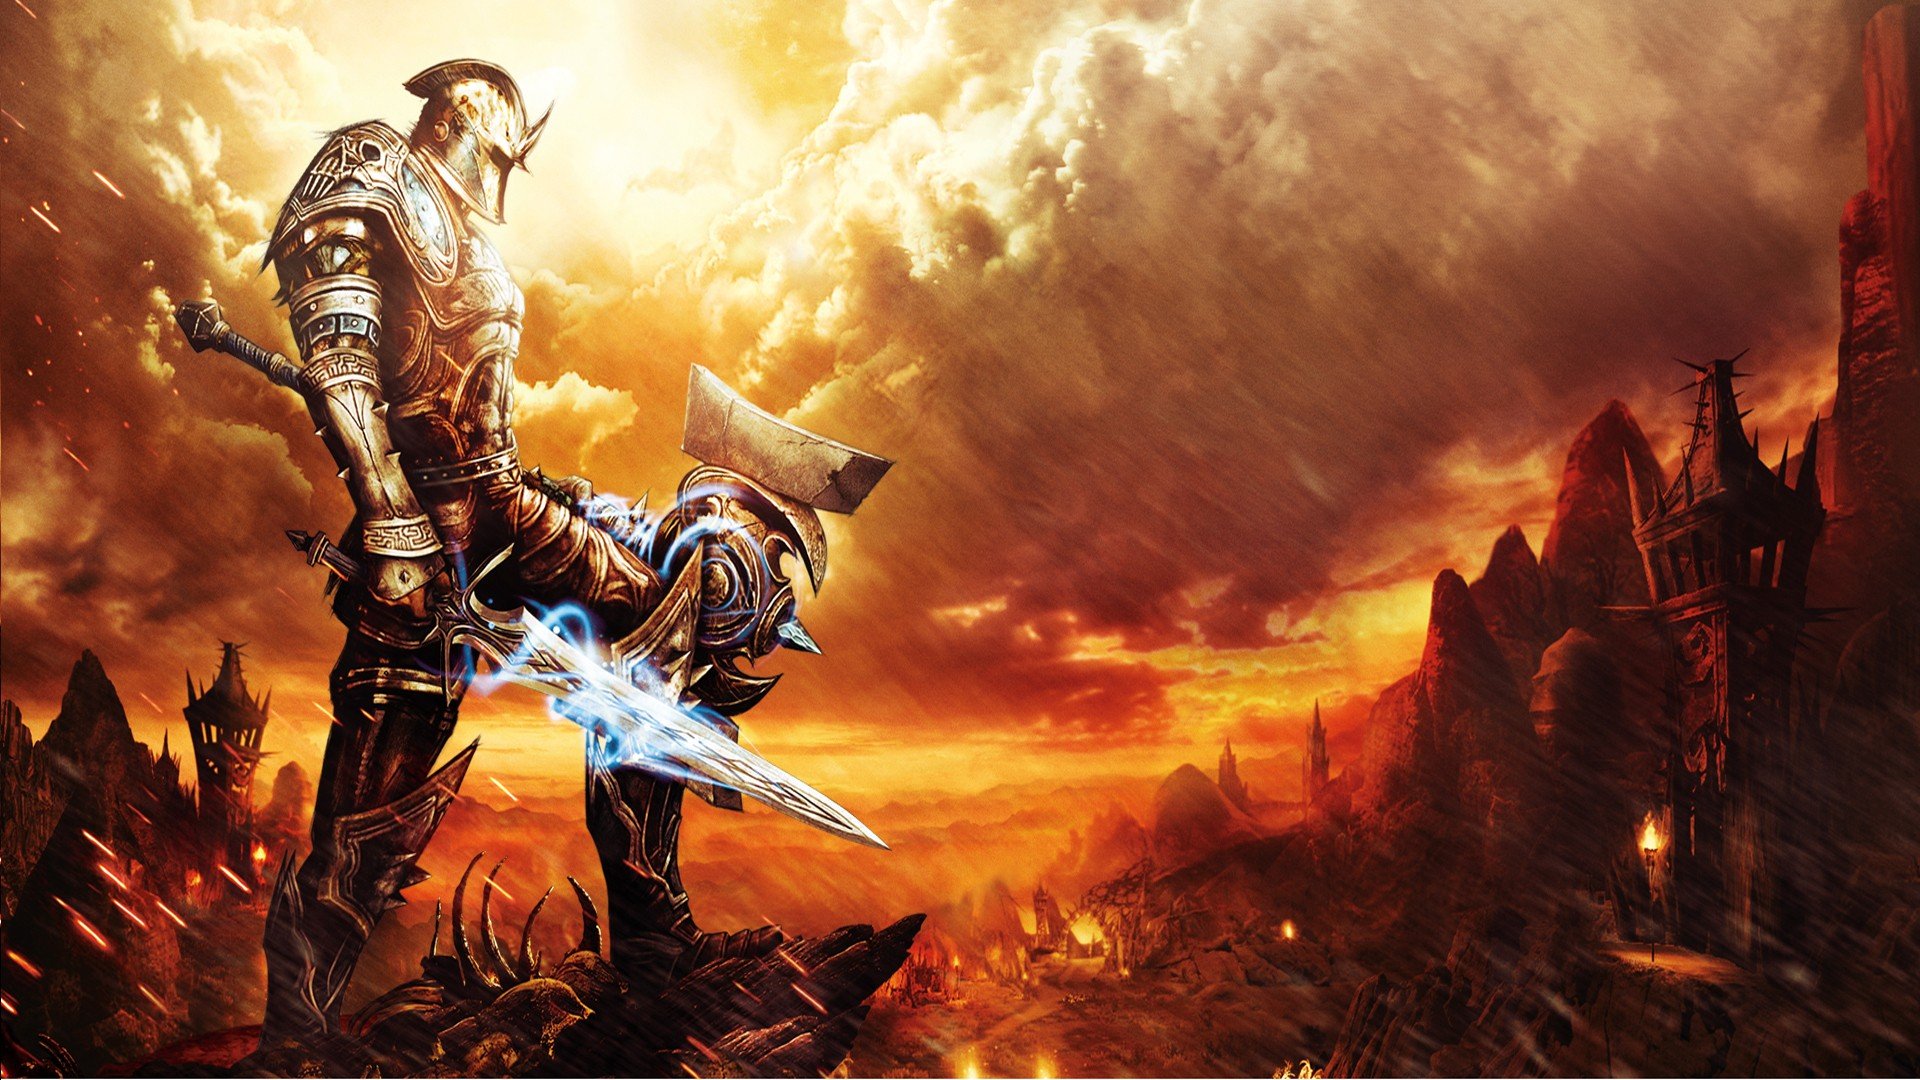 flames, Video, Games, Clouds, Sun, Fire, Weapons, Hammer, Video, Armor, Magic, Sunlight, Warriors, Reckoning, Kingdoms, Of, Amalur, Swords, Torch, Game Wallpaper